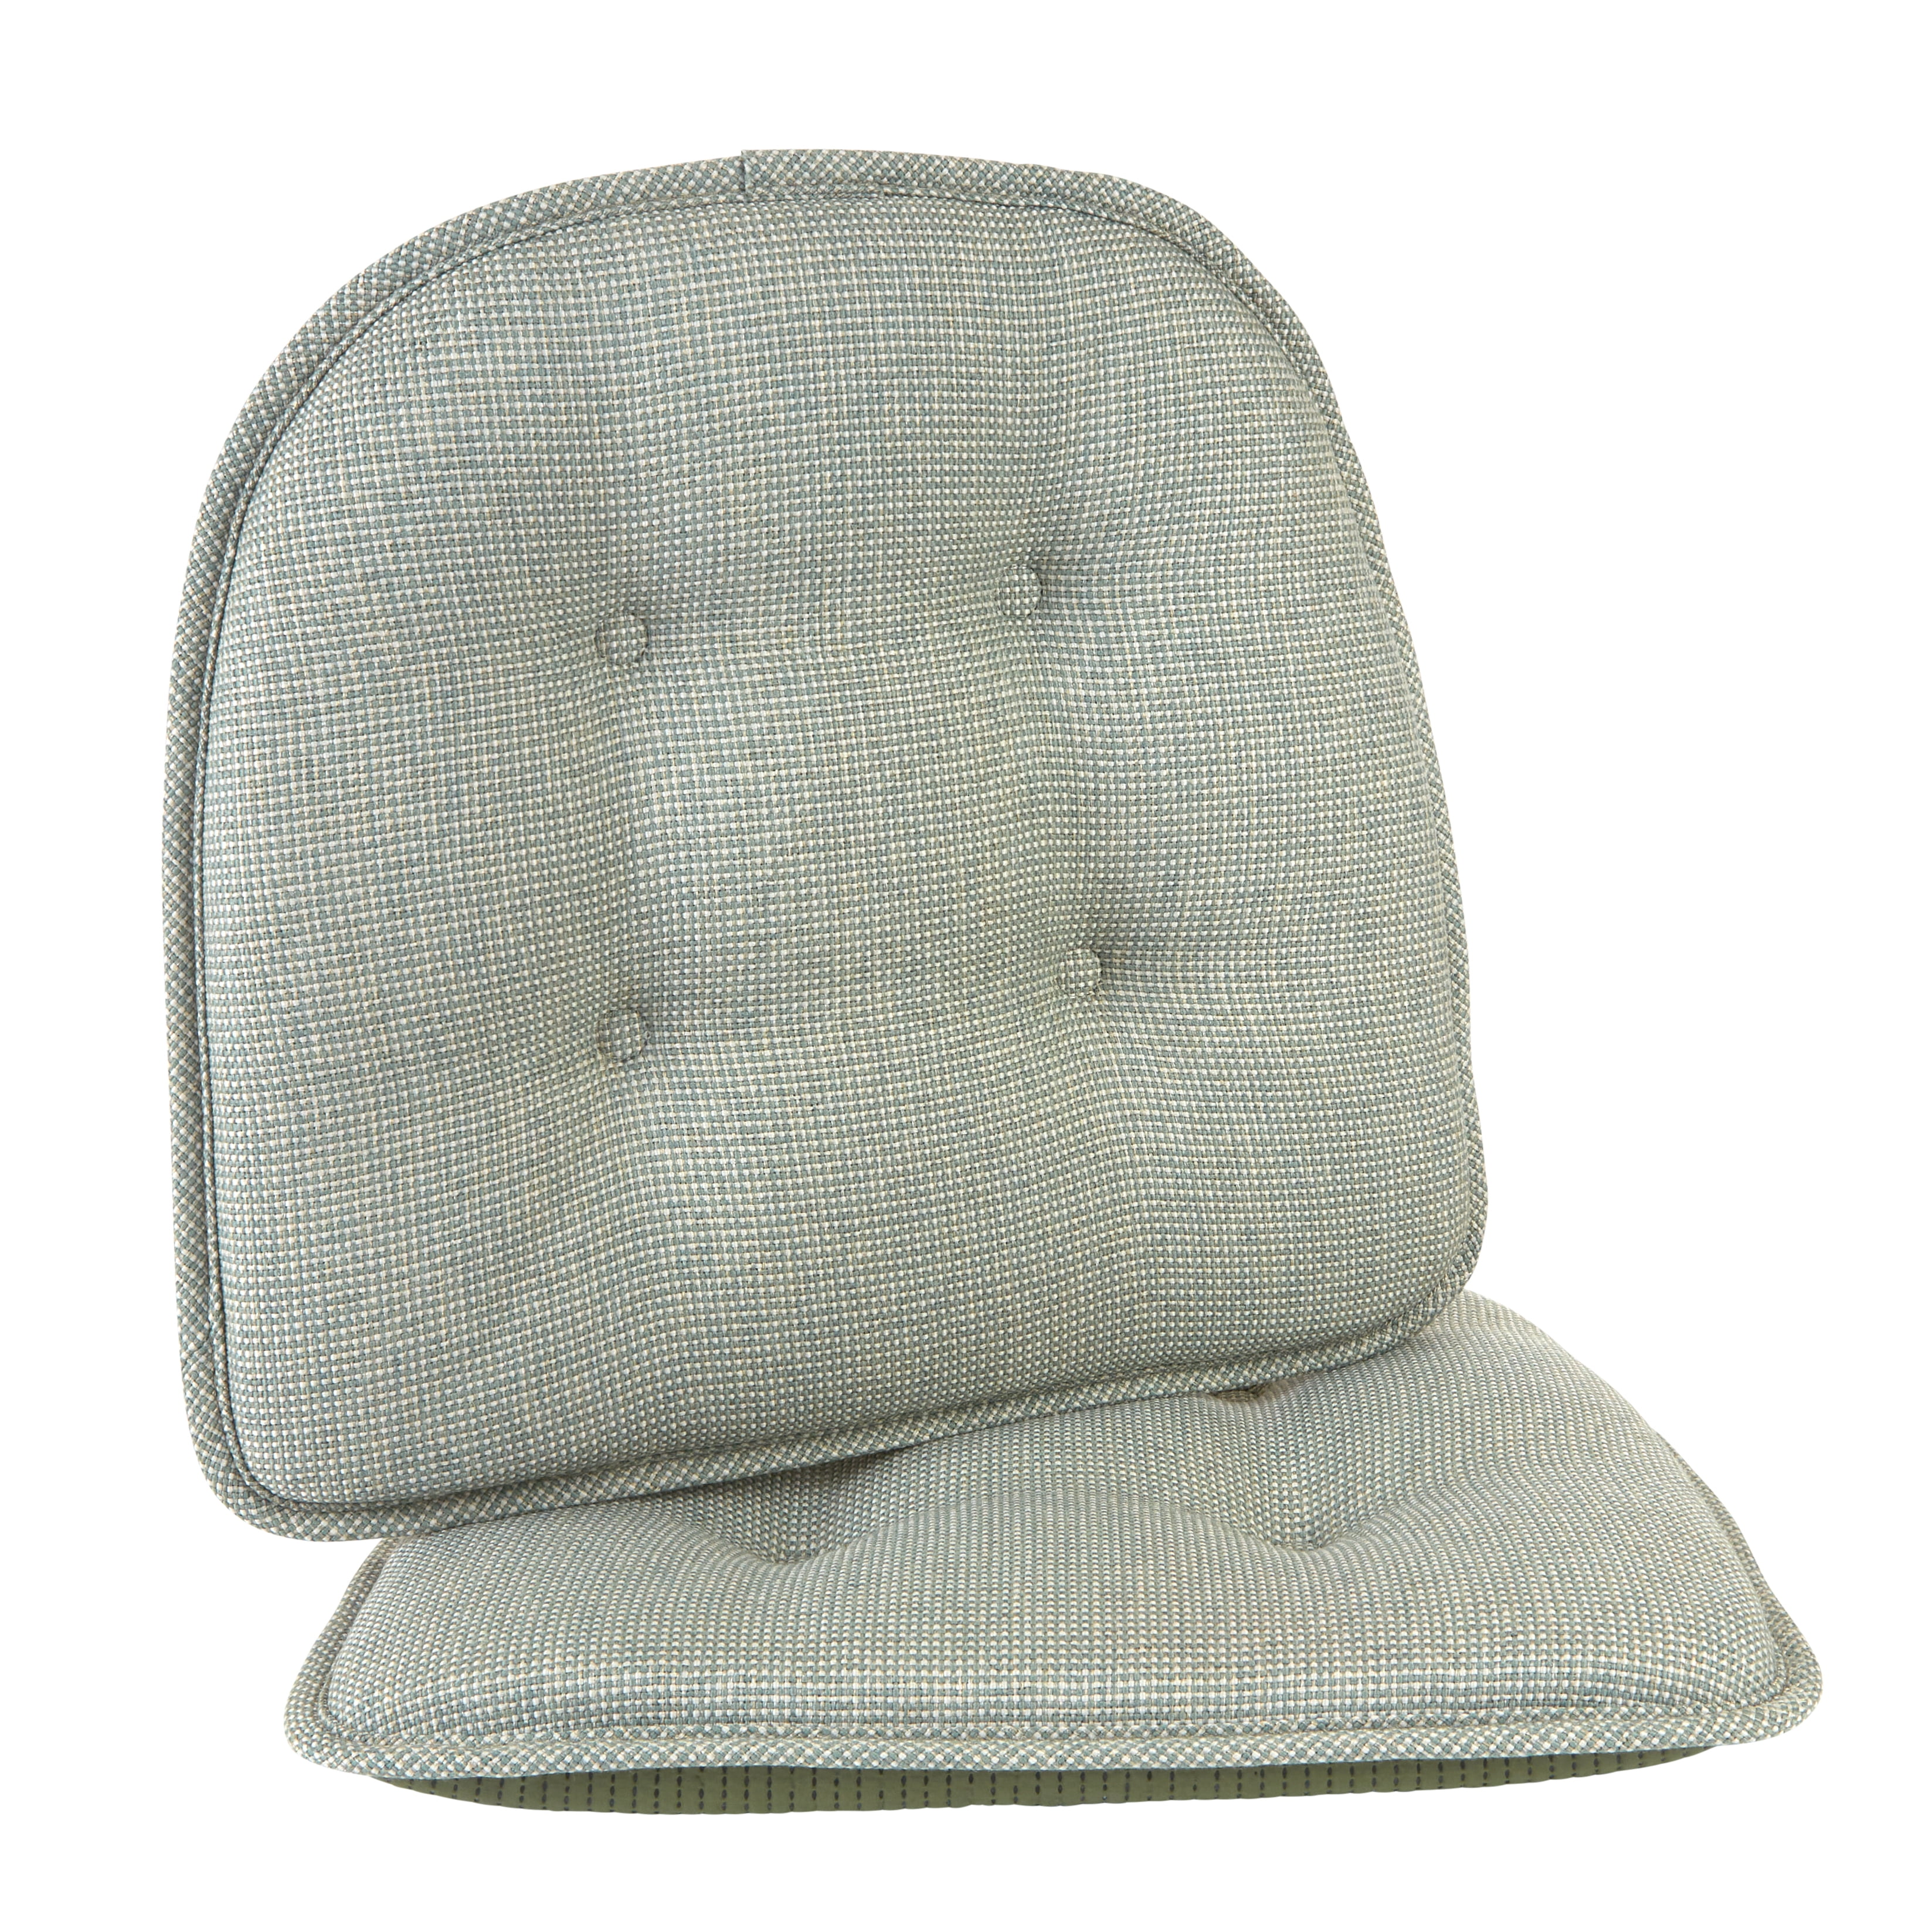 Chair Cushions for Dining Chairs, Memory Foam Chair Cushion Tufted Chair  Pads for Dining Chairs - Corn Kernel Seat cushion - Gray Blue 